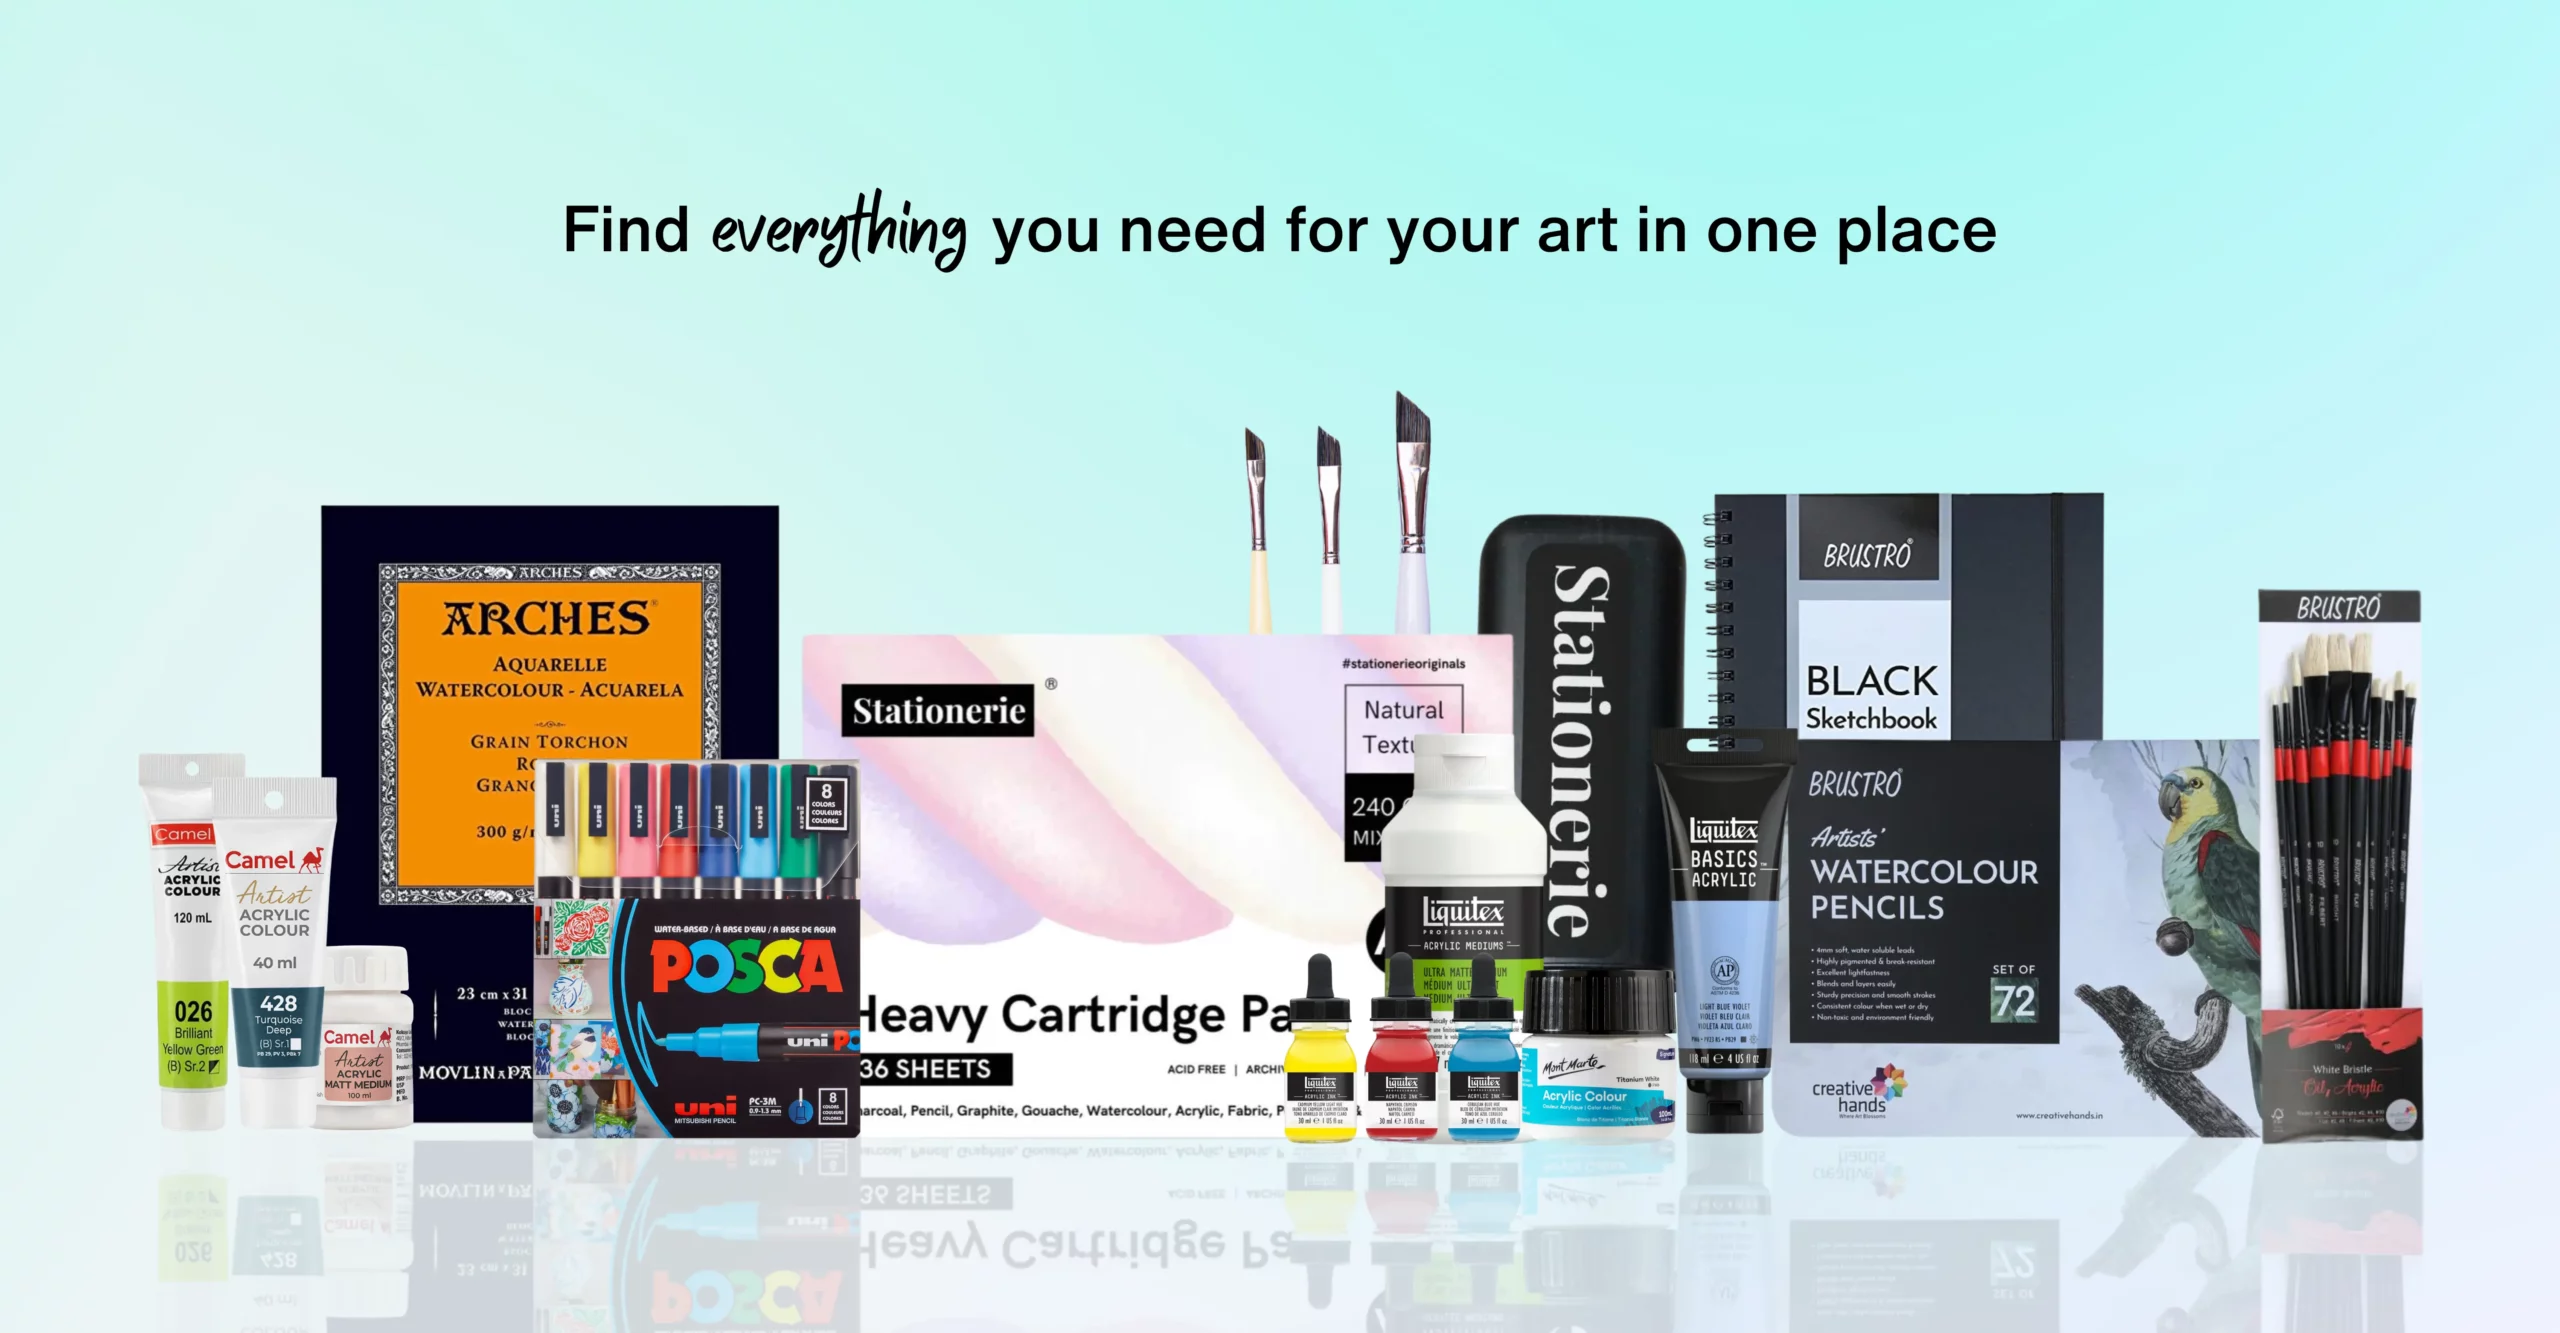 Find everything you need for your art in one place